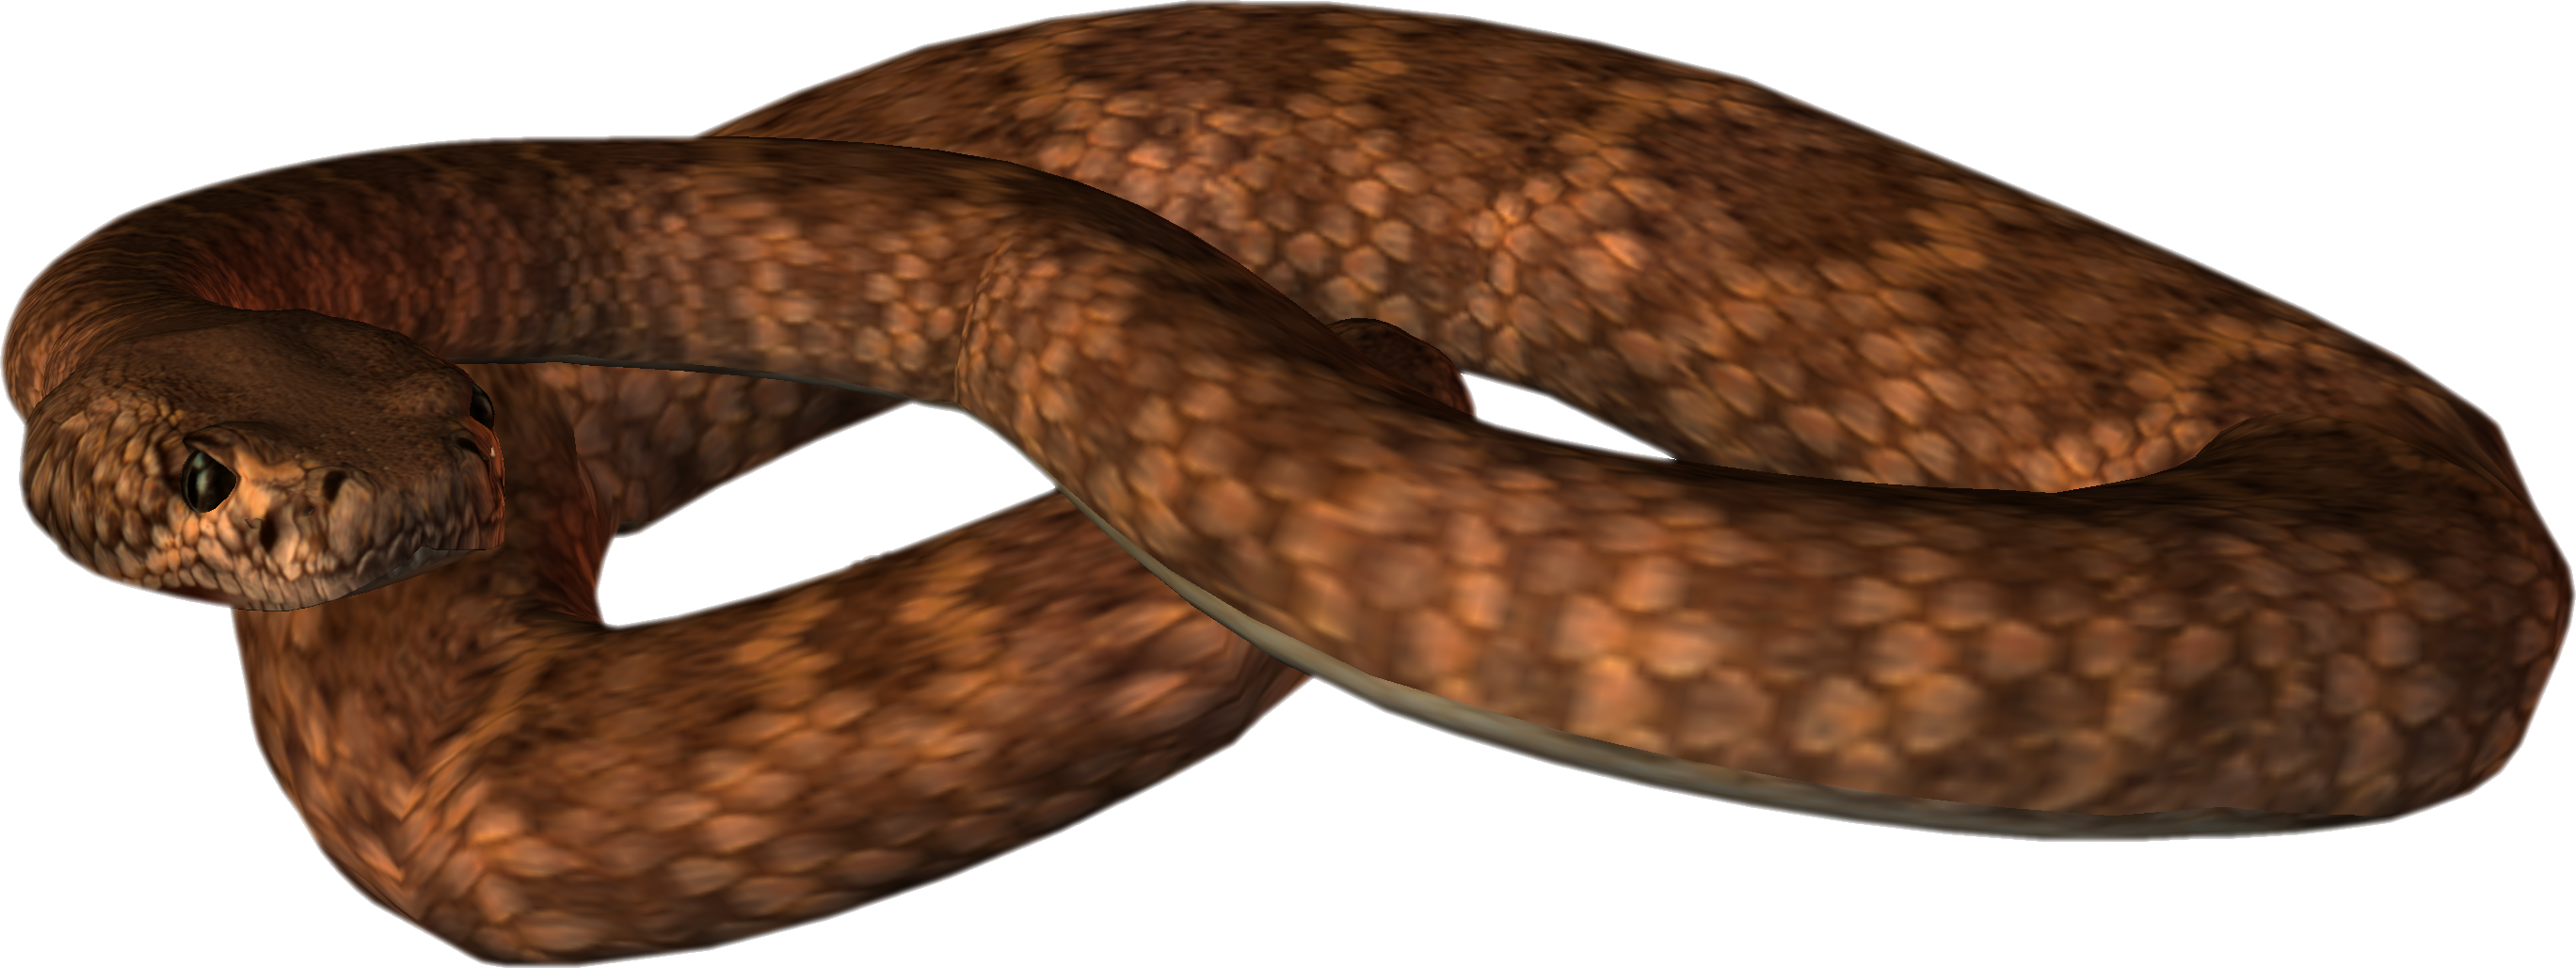 Snakes png transparent images. Snake clipart poisonous snake